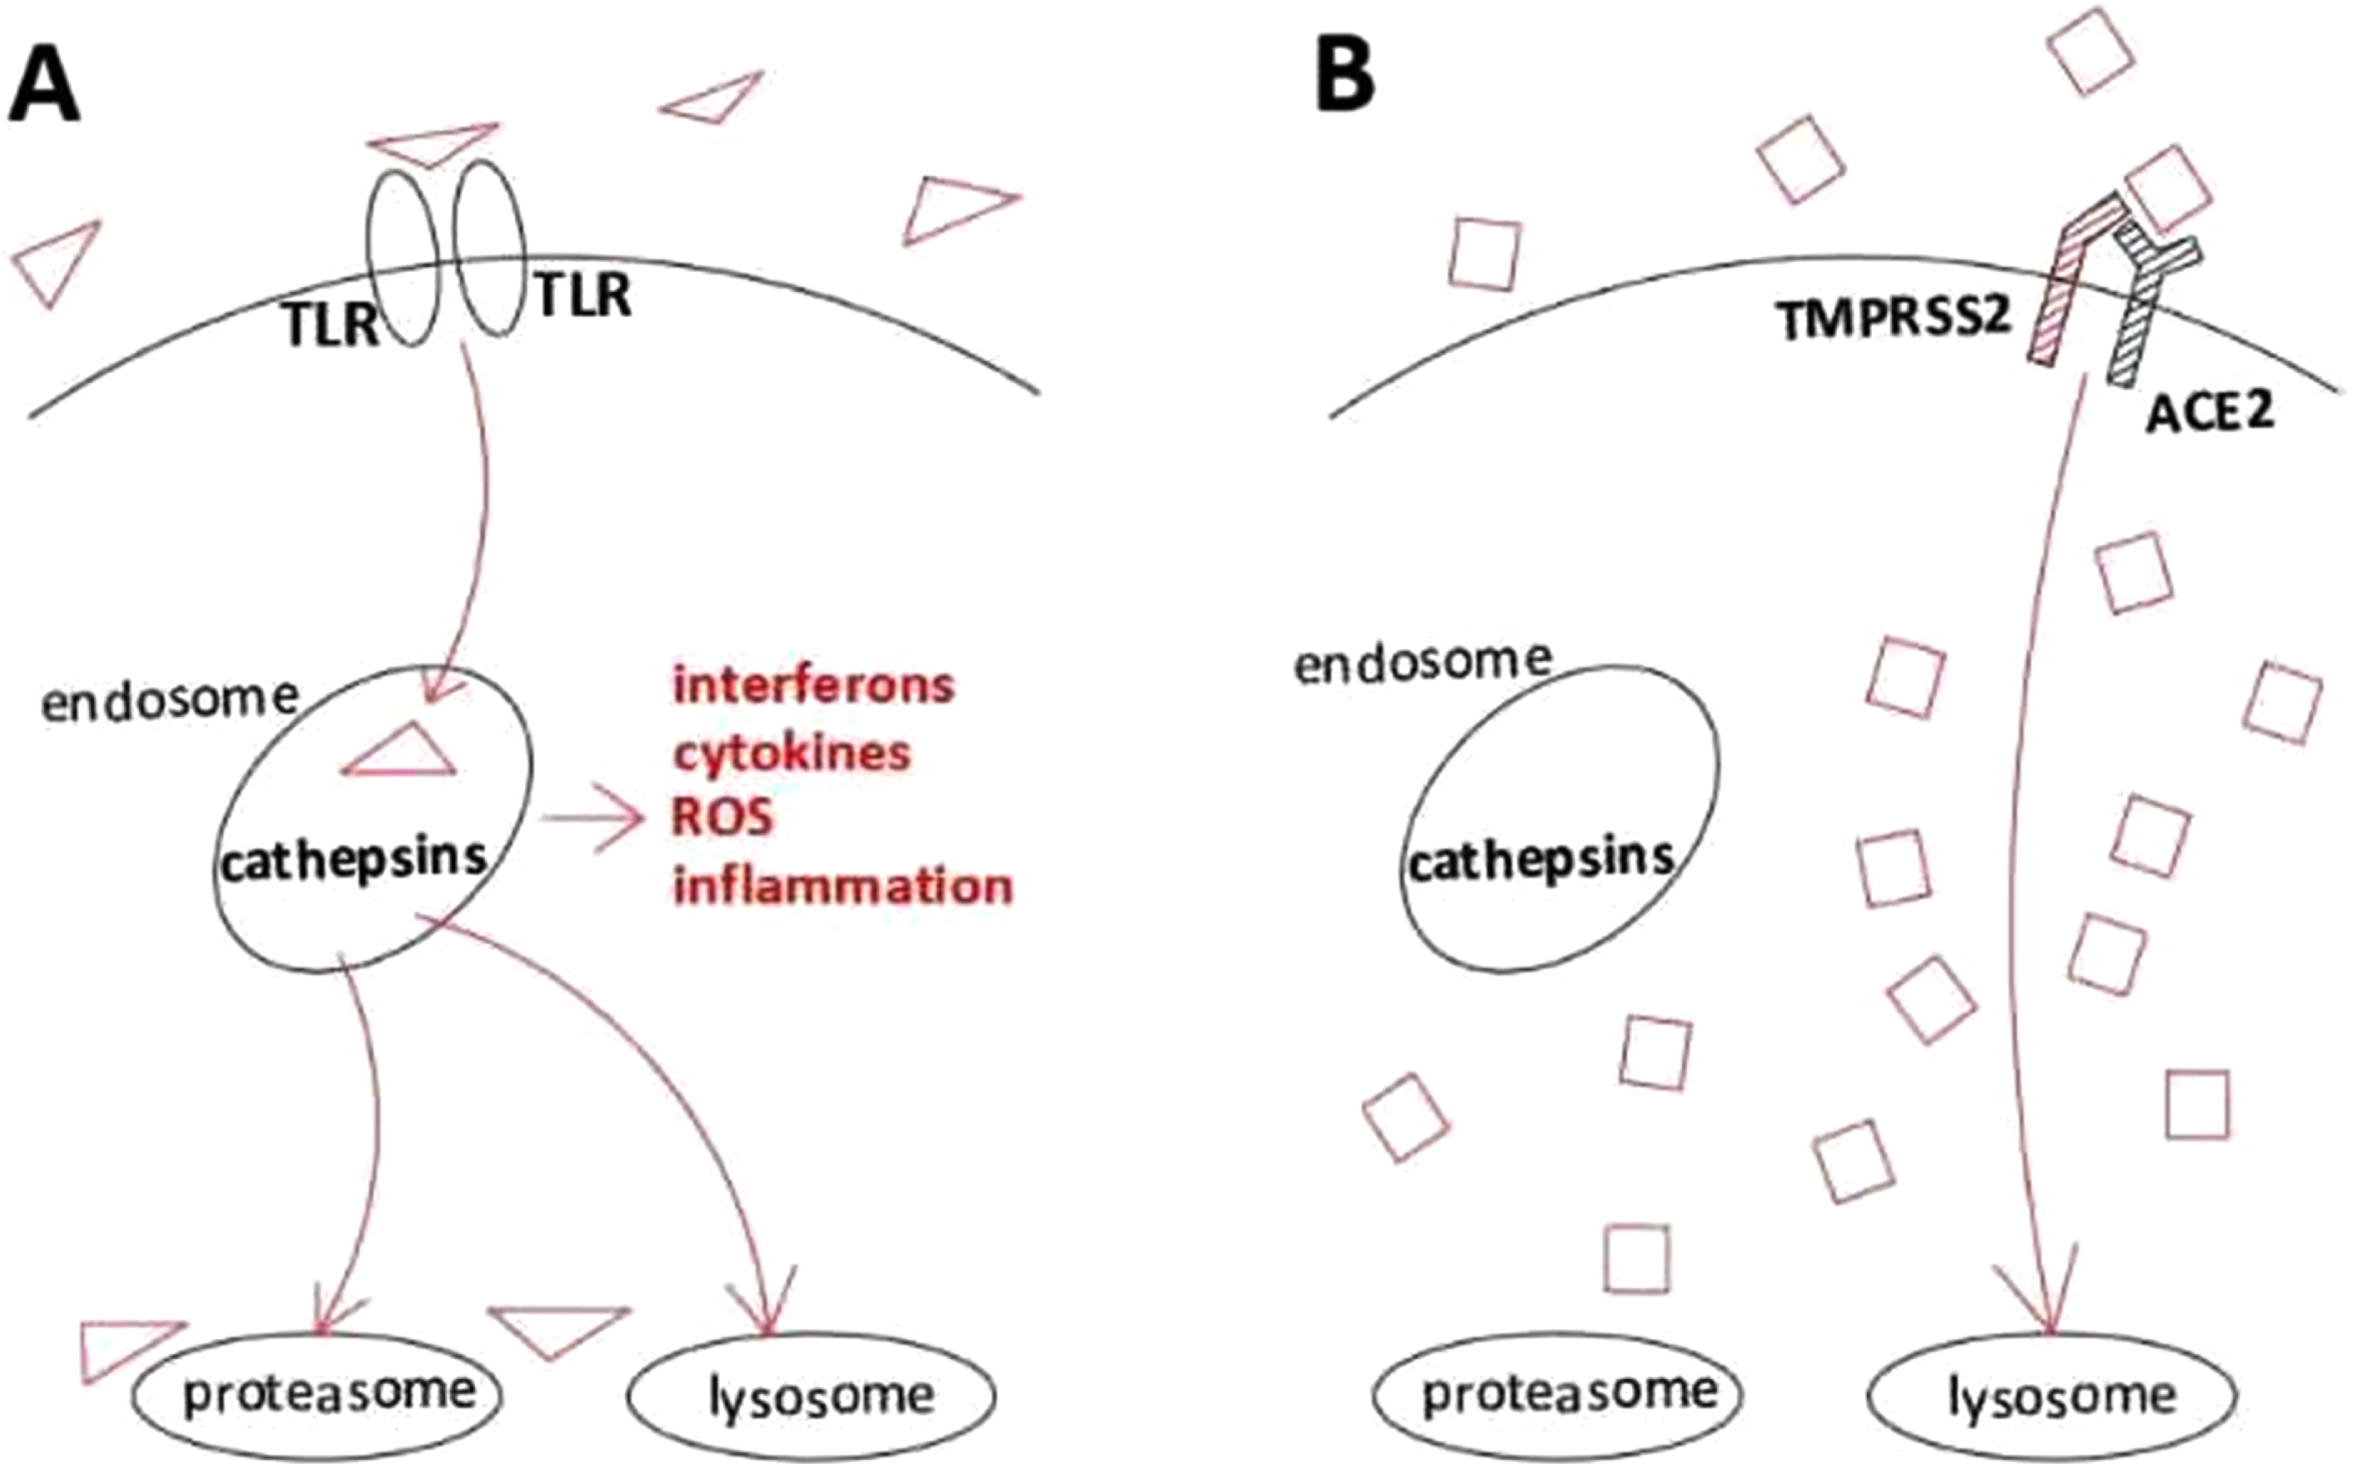 Schematic depiction of internalisation pathways with dissimilar inflammatory effects triggered by different viruses. A, Activation of the TLR-mediated endosomal cathepsin pathway, initiating innate immune signaling, thus leading to higher cell inflammation and lower viral survival. ROS, reactive oxygen species (which damage DNA, thus predisposing to potentially carcinogenic genetic changes, including but not limited to TMPRSS2:ERG fusions). B, Activation of TMPRSS2/ACE2 intracellular trafficking, which bypasses endosomal capture and innate immunity, leading to lower cell inflammation and higher viral survival.